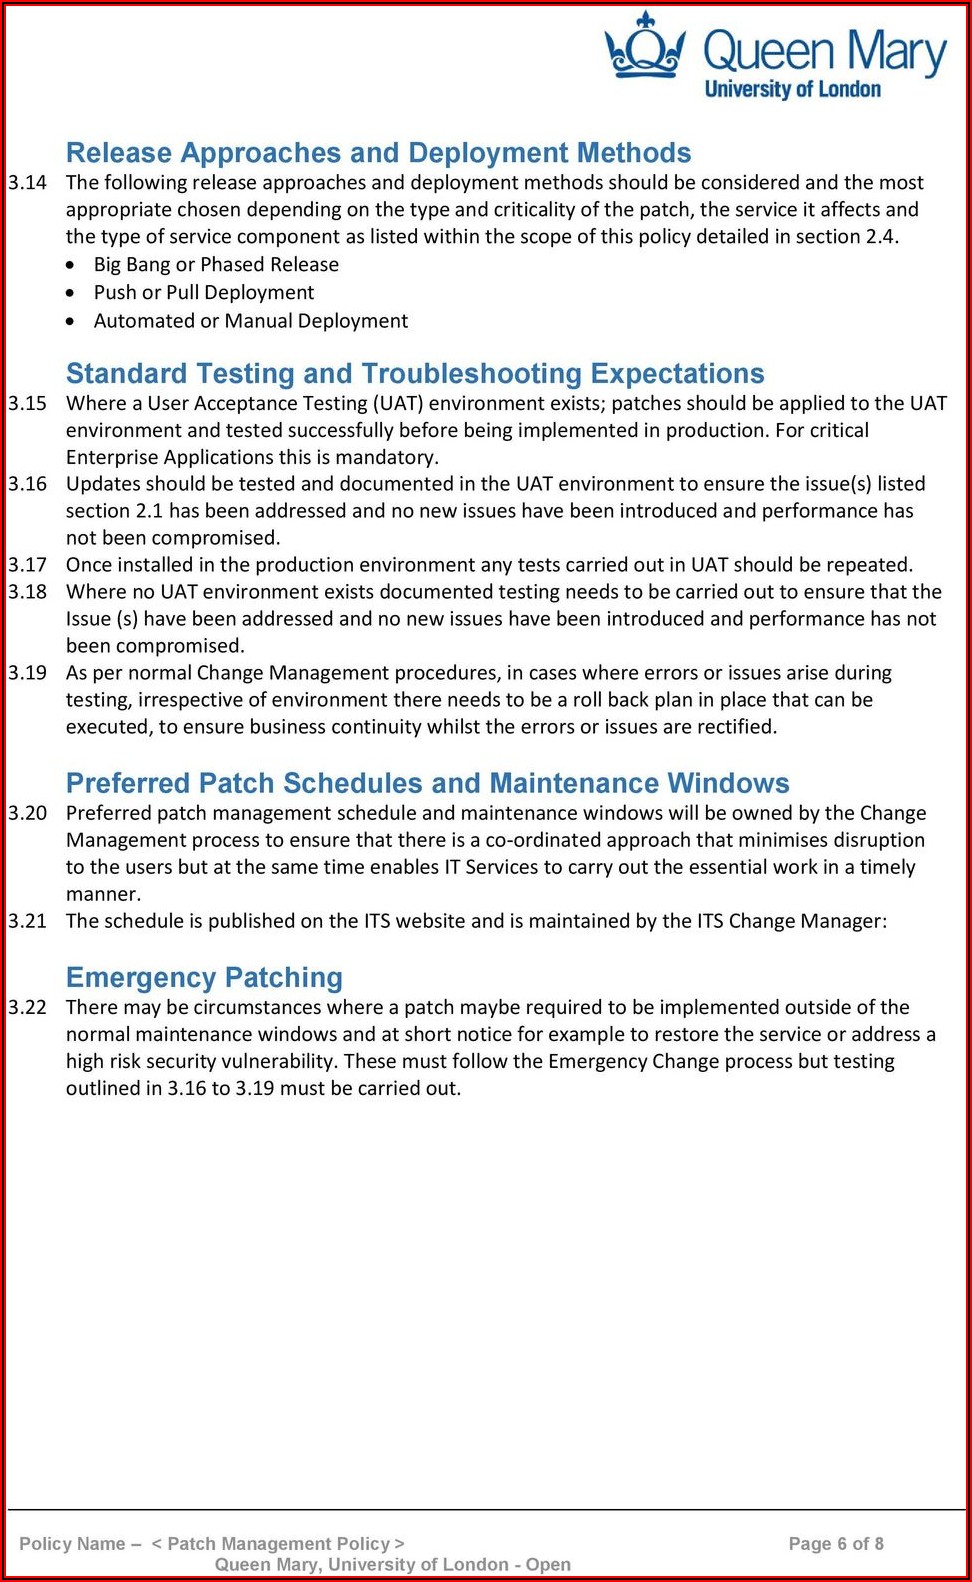 Patch Management Policy Template Nist